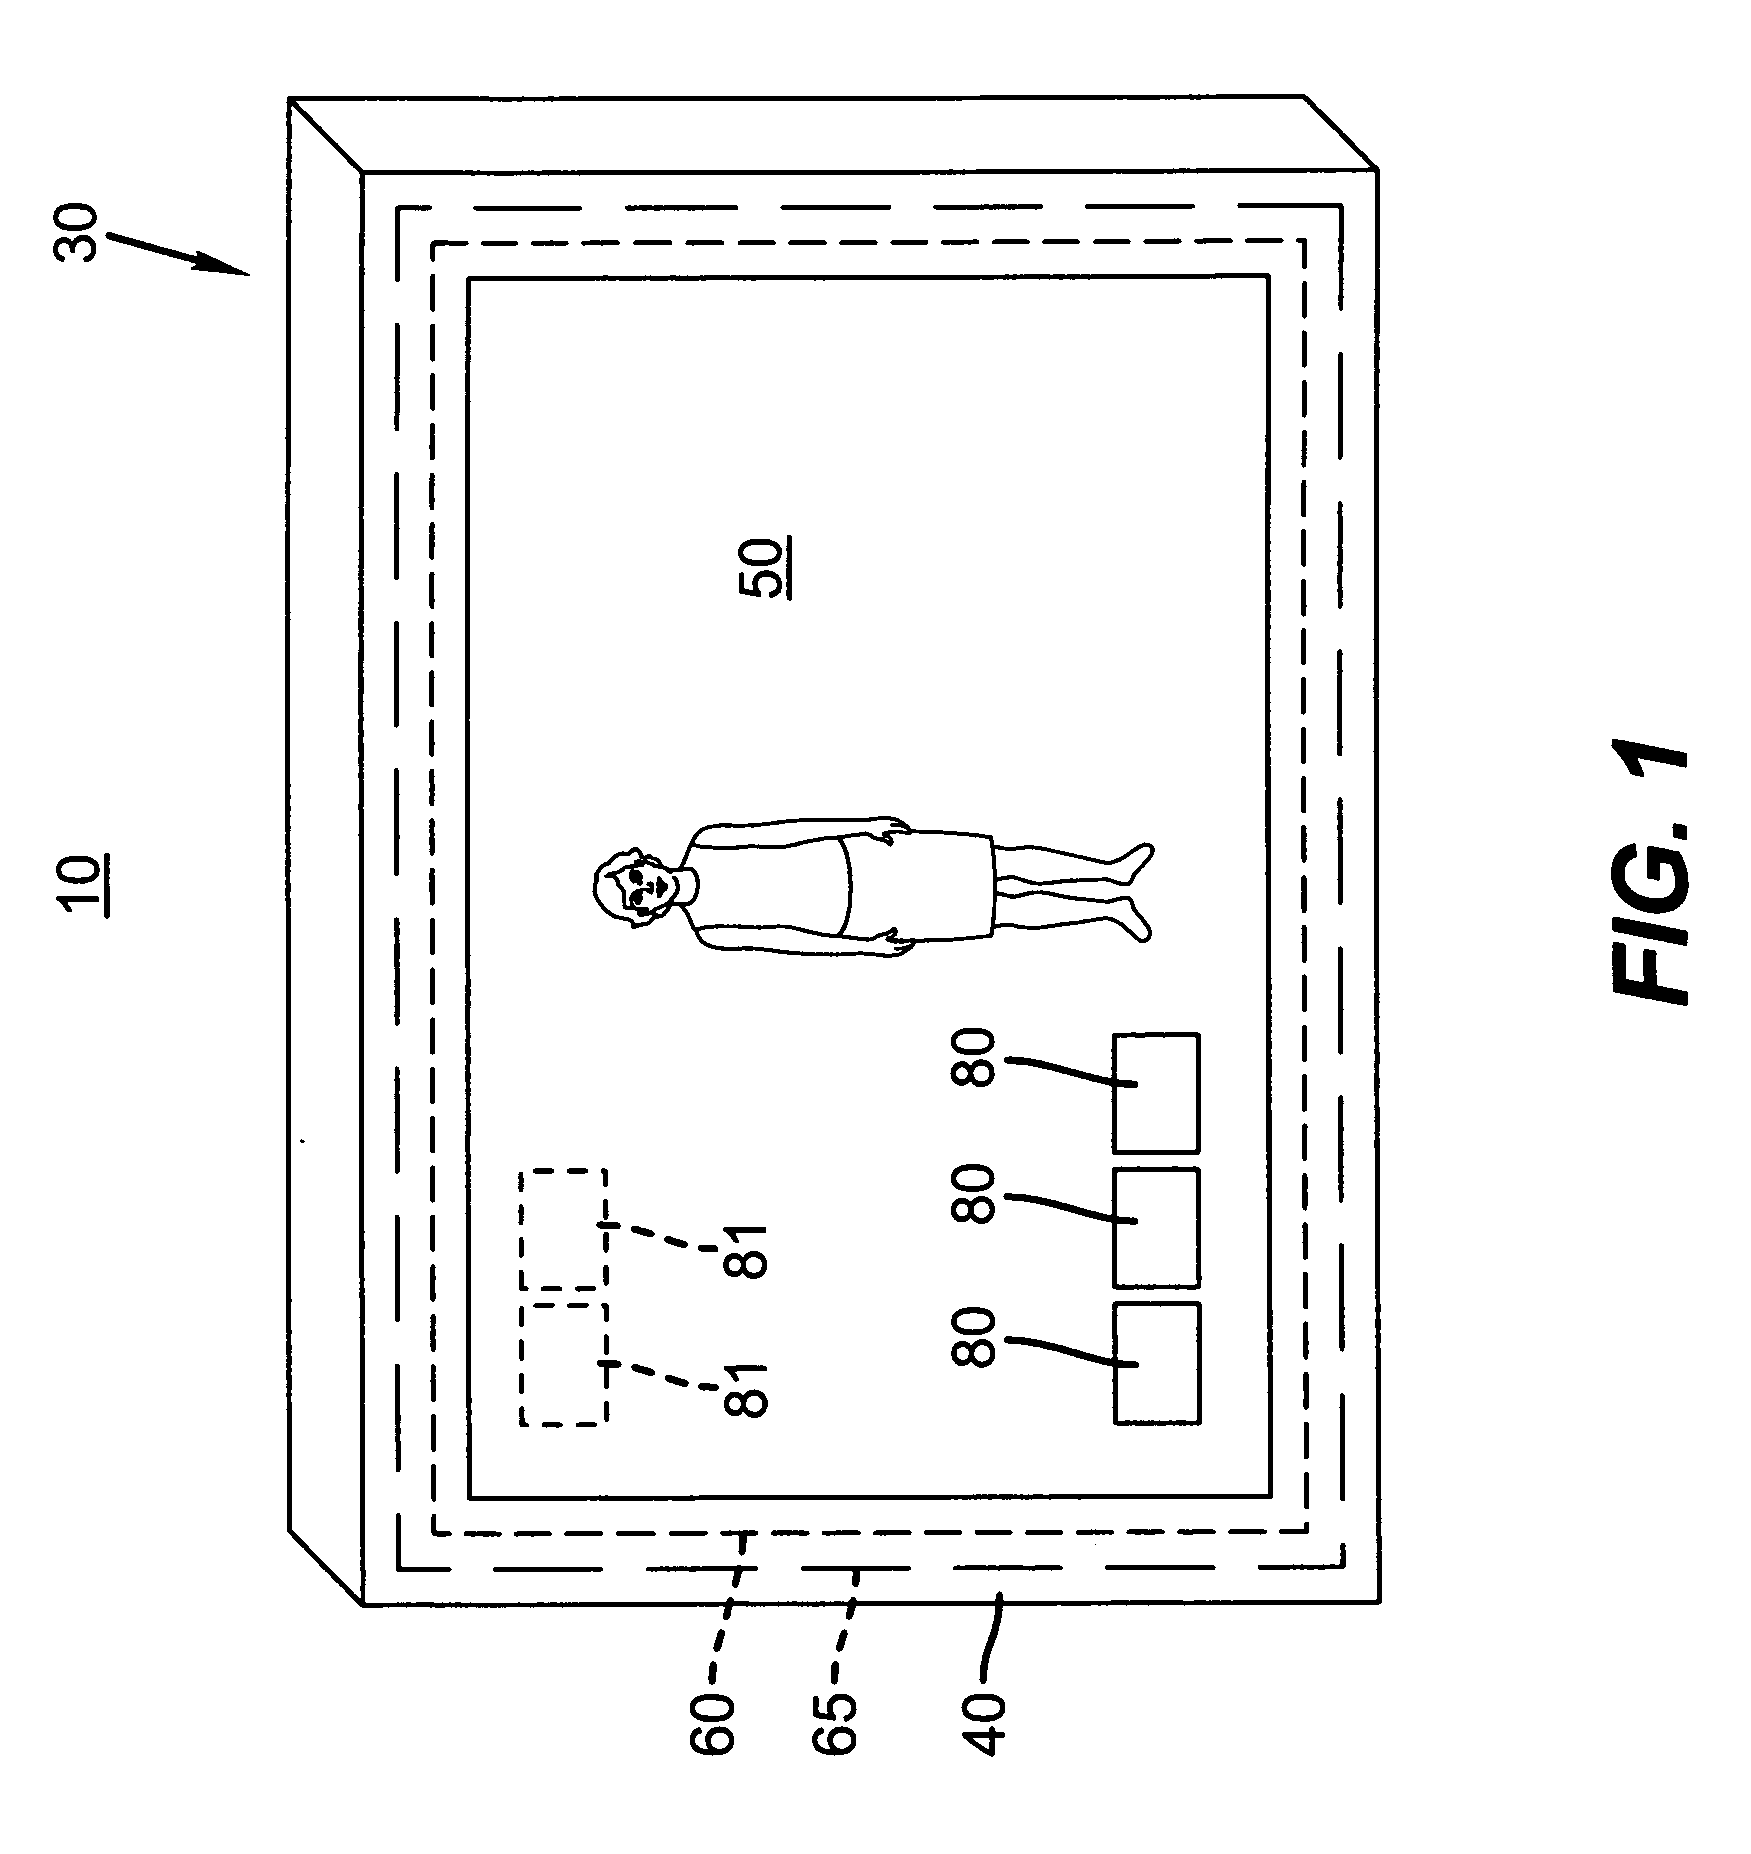 Digital picture frame having near-touch and true-touch